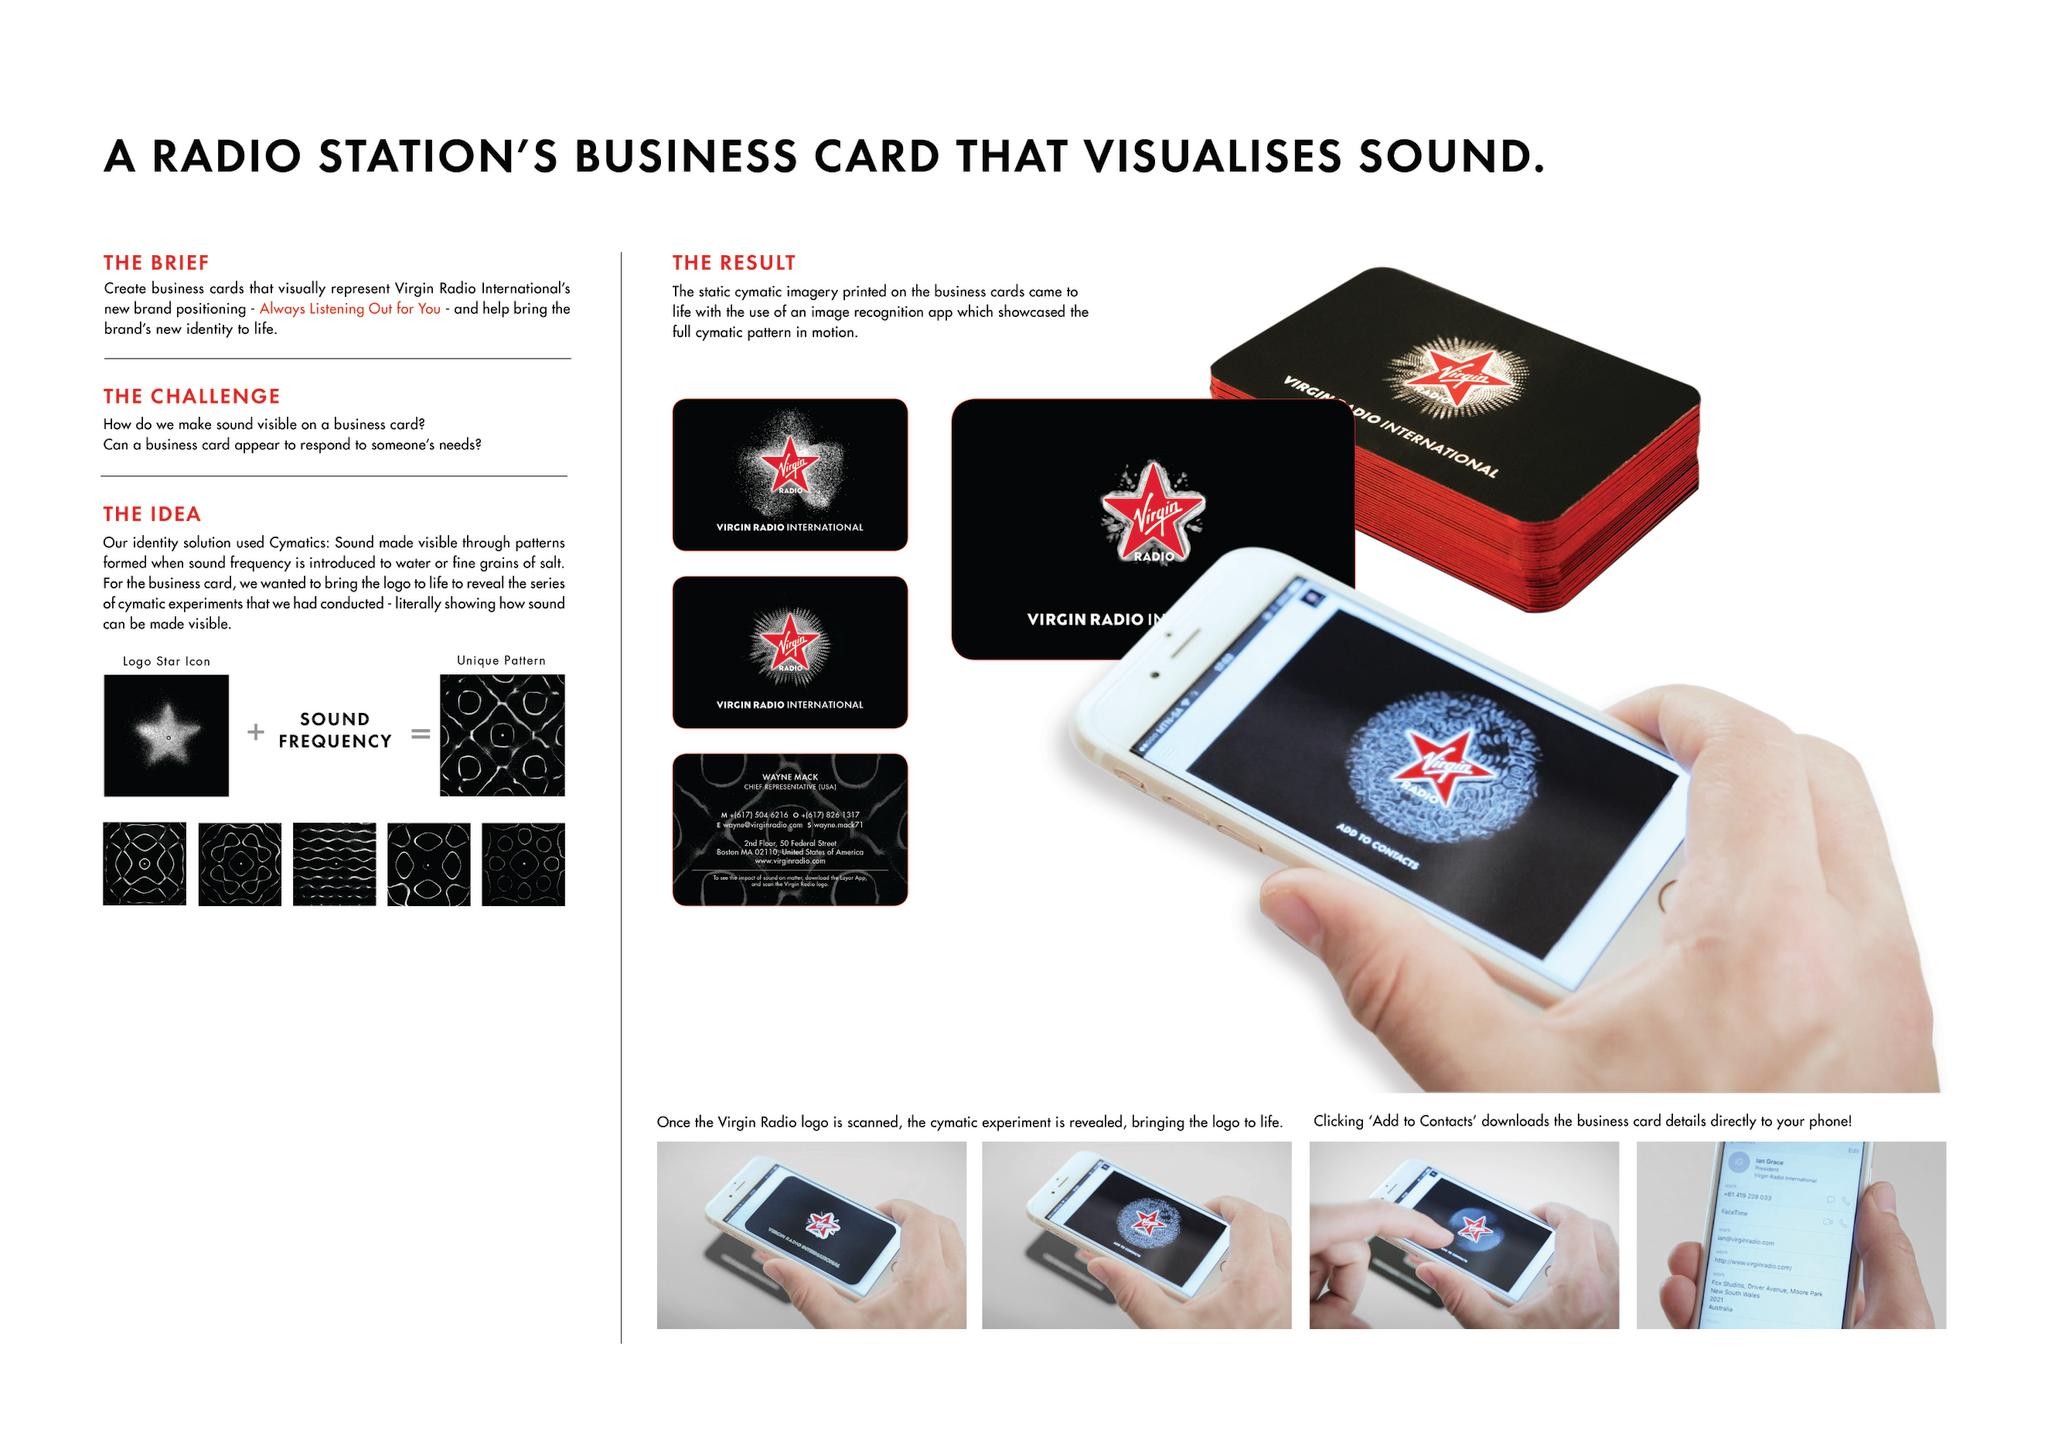 Always Listening Out For You: Interactive Business Card